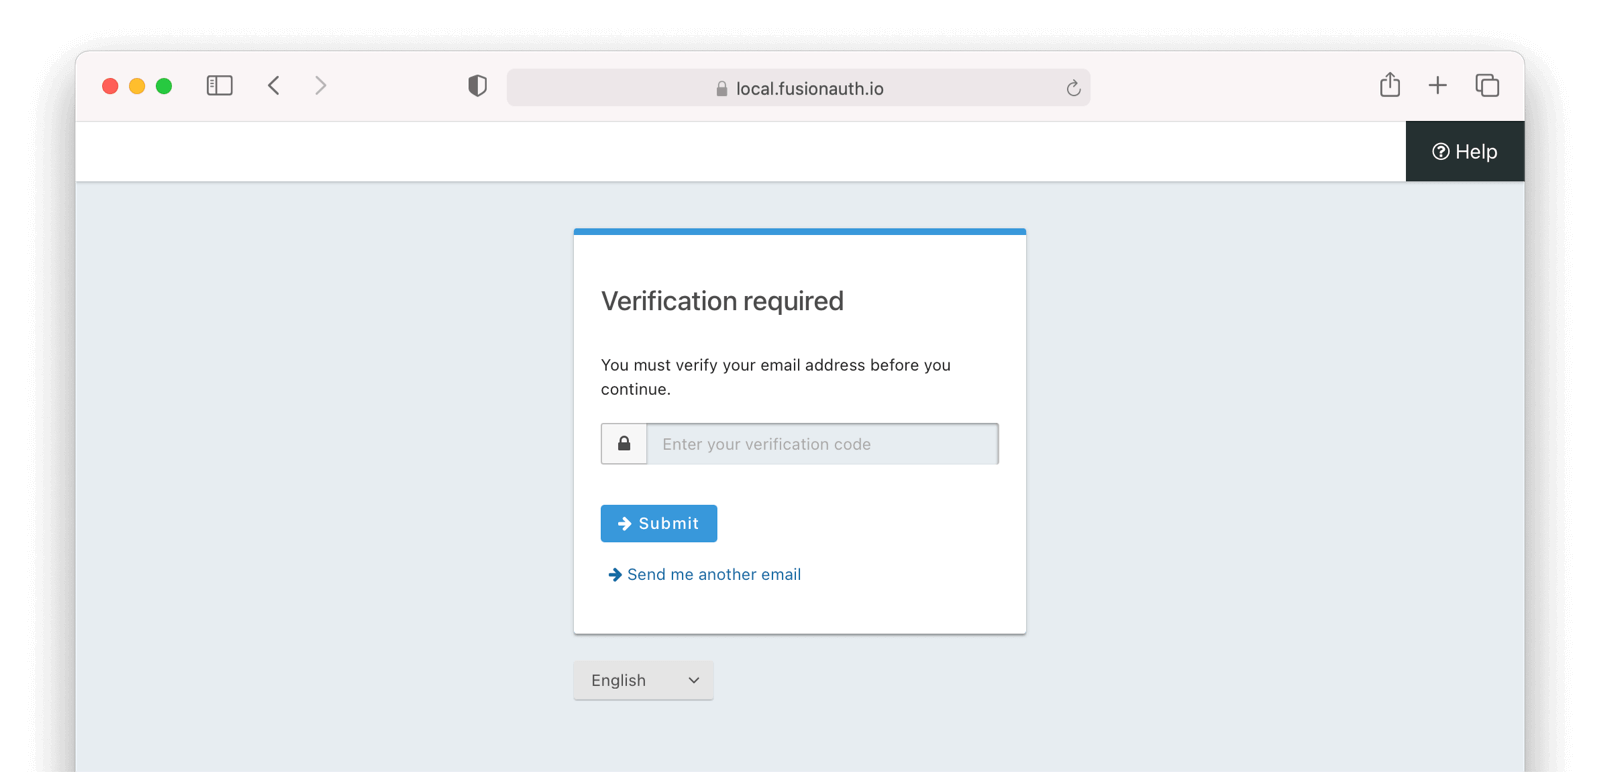 The email verification code entry screen..